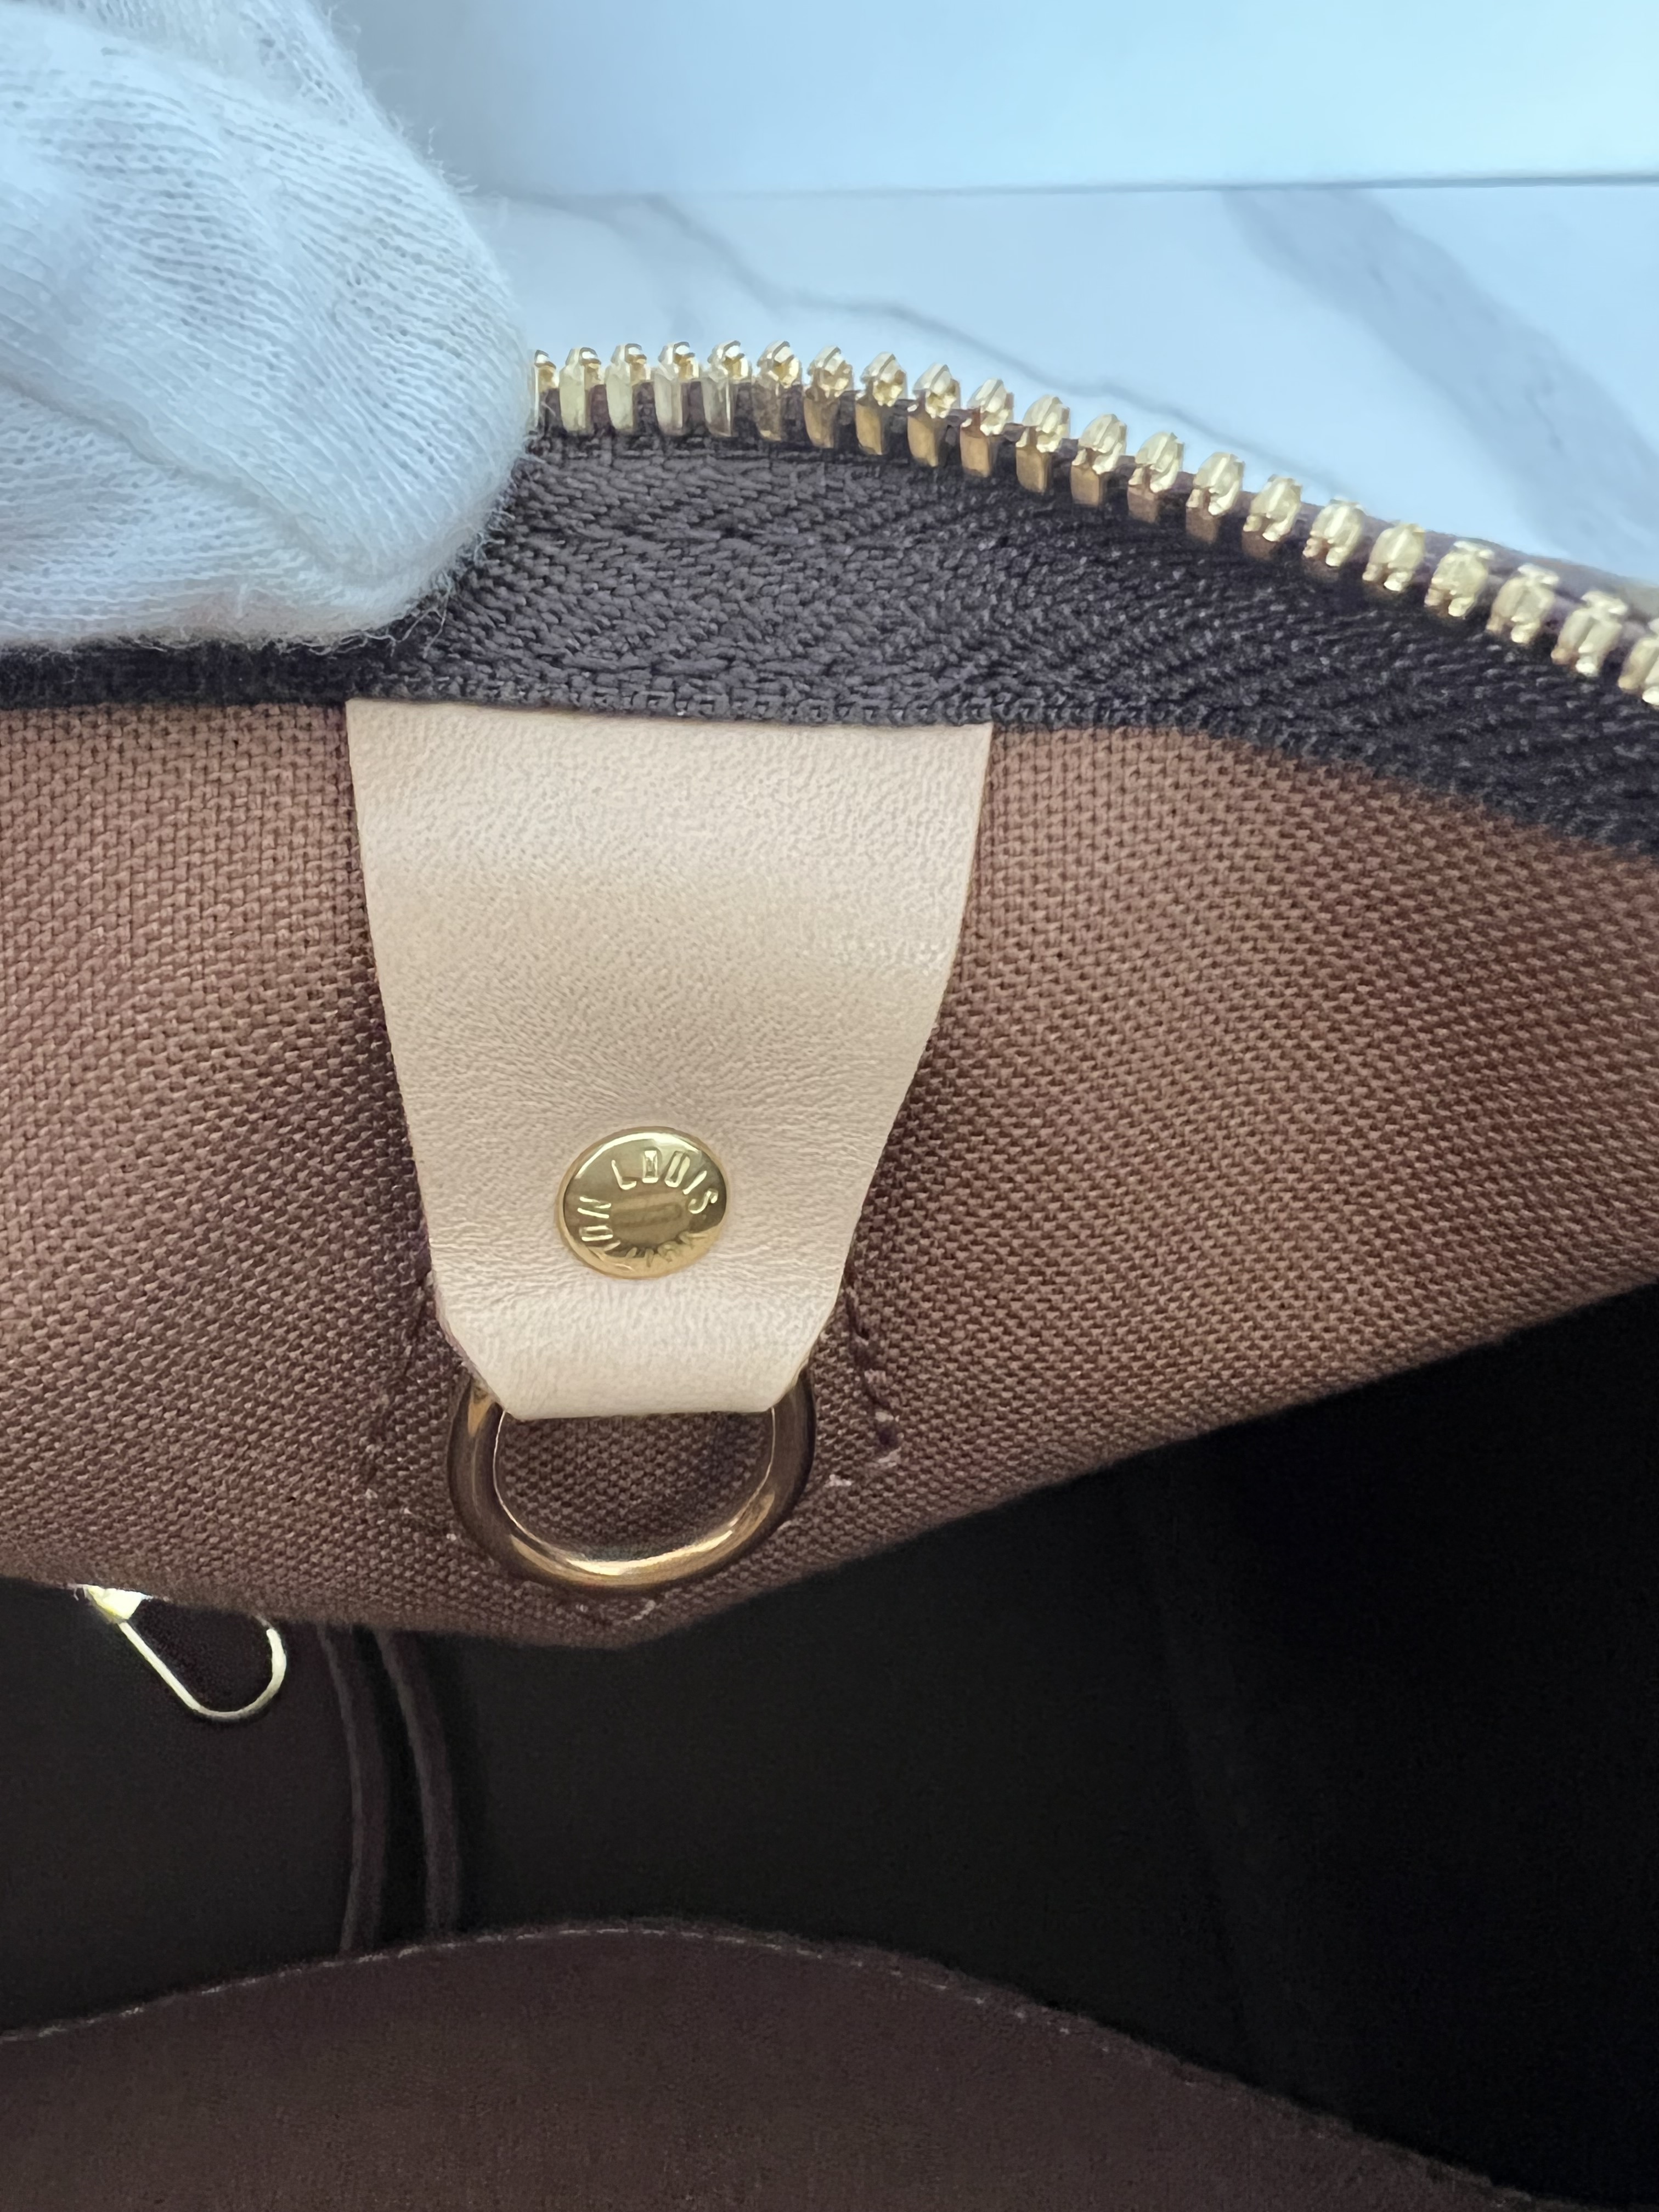 Poshbag Boutique - New-in! This Louis Vuitton Speedy Bandoulière 30 in Monogram  Giant Reverse Canvas is in excellent condition and includes its original  box, dust bag, shoulder strap, lock and keys •